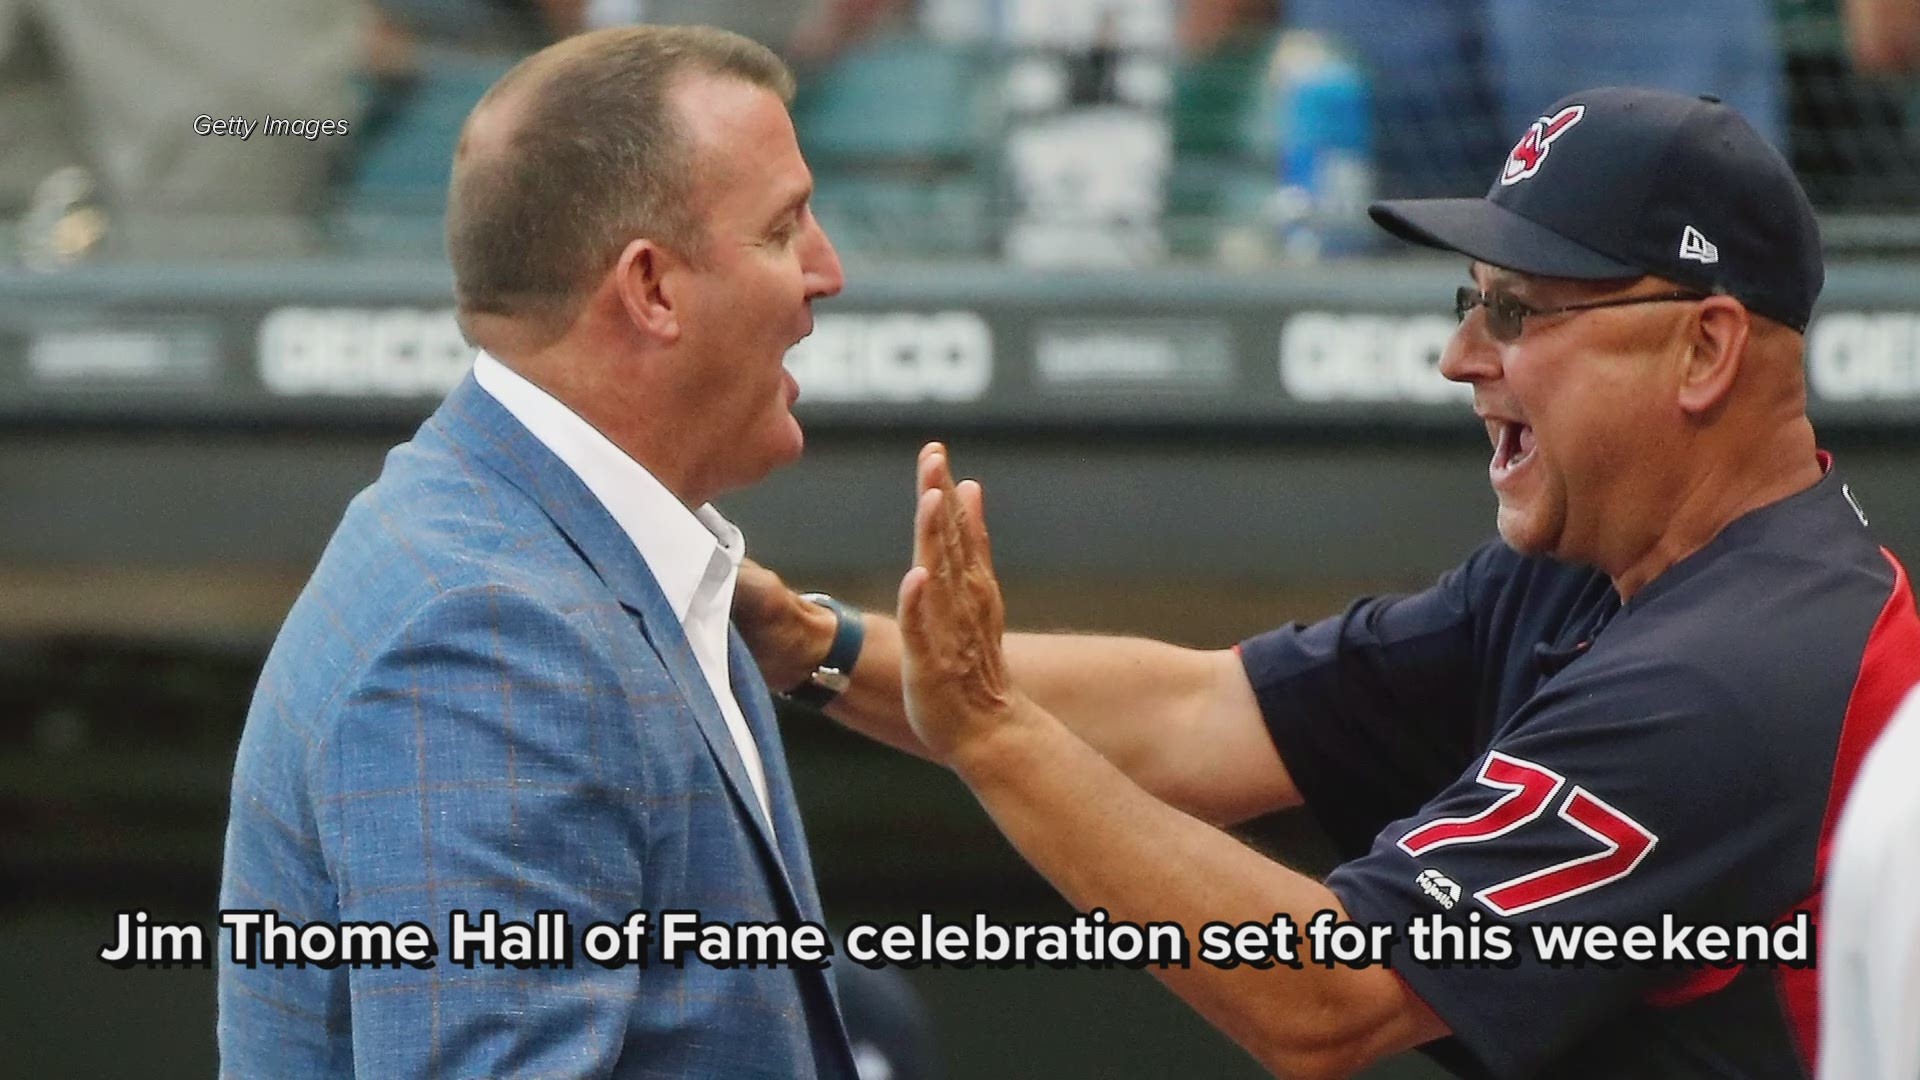 Cleveland Indians' Jim Thome Hall of Fame celebration set for this weekend